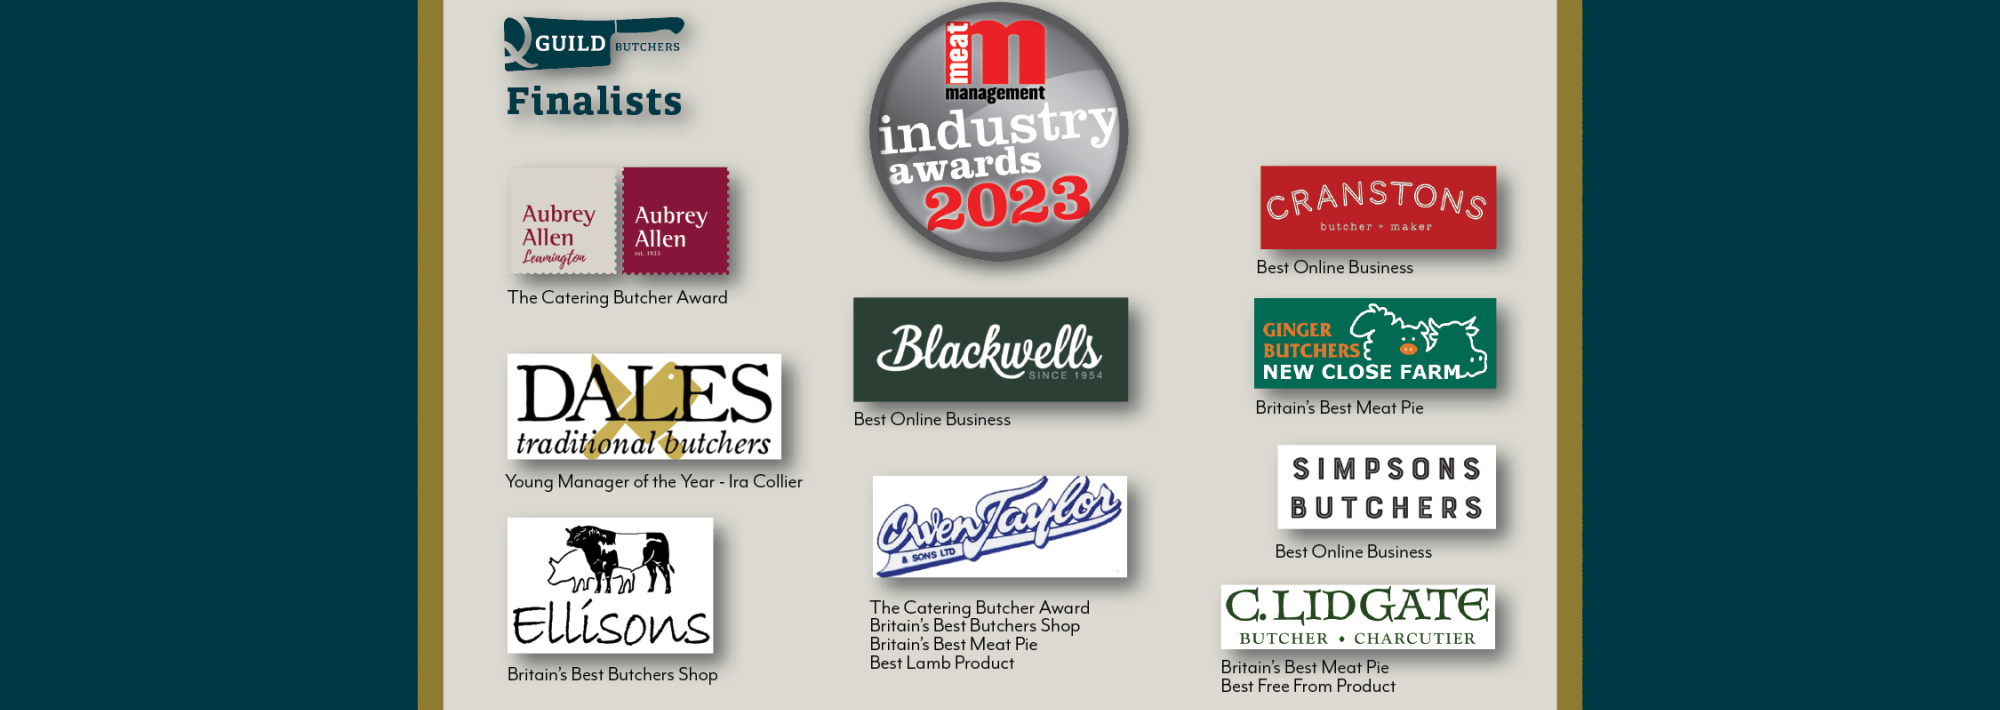 Q Guild Finalists in Meat Management Industry Awards 2023